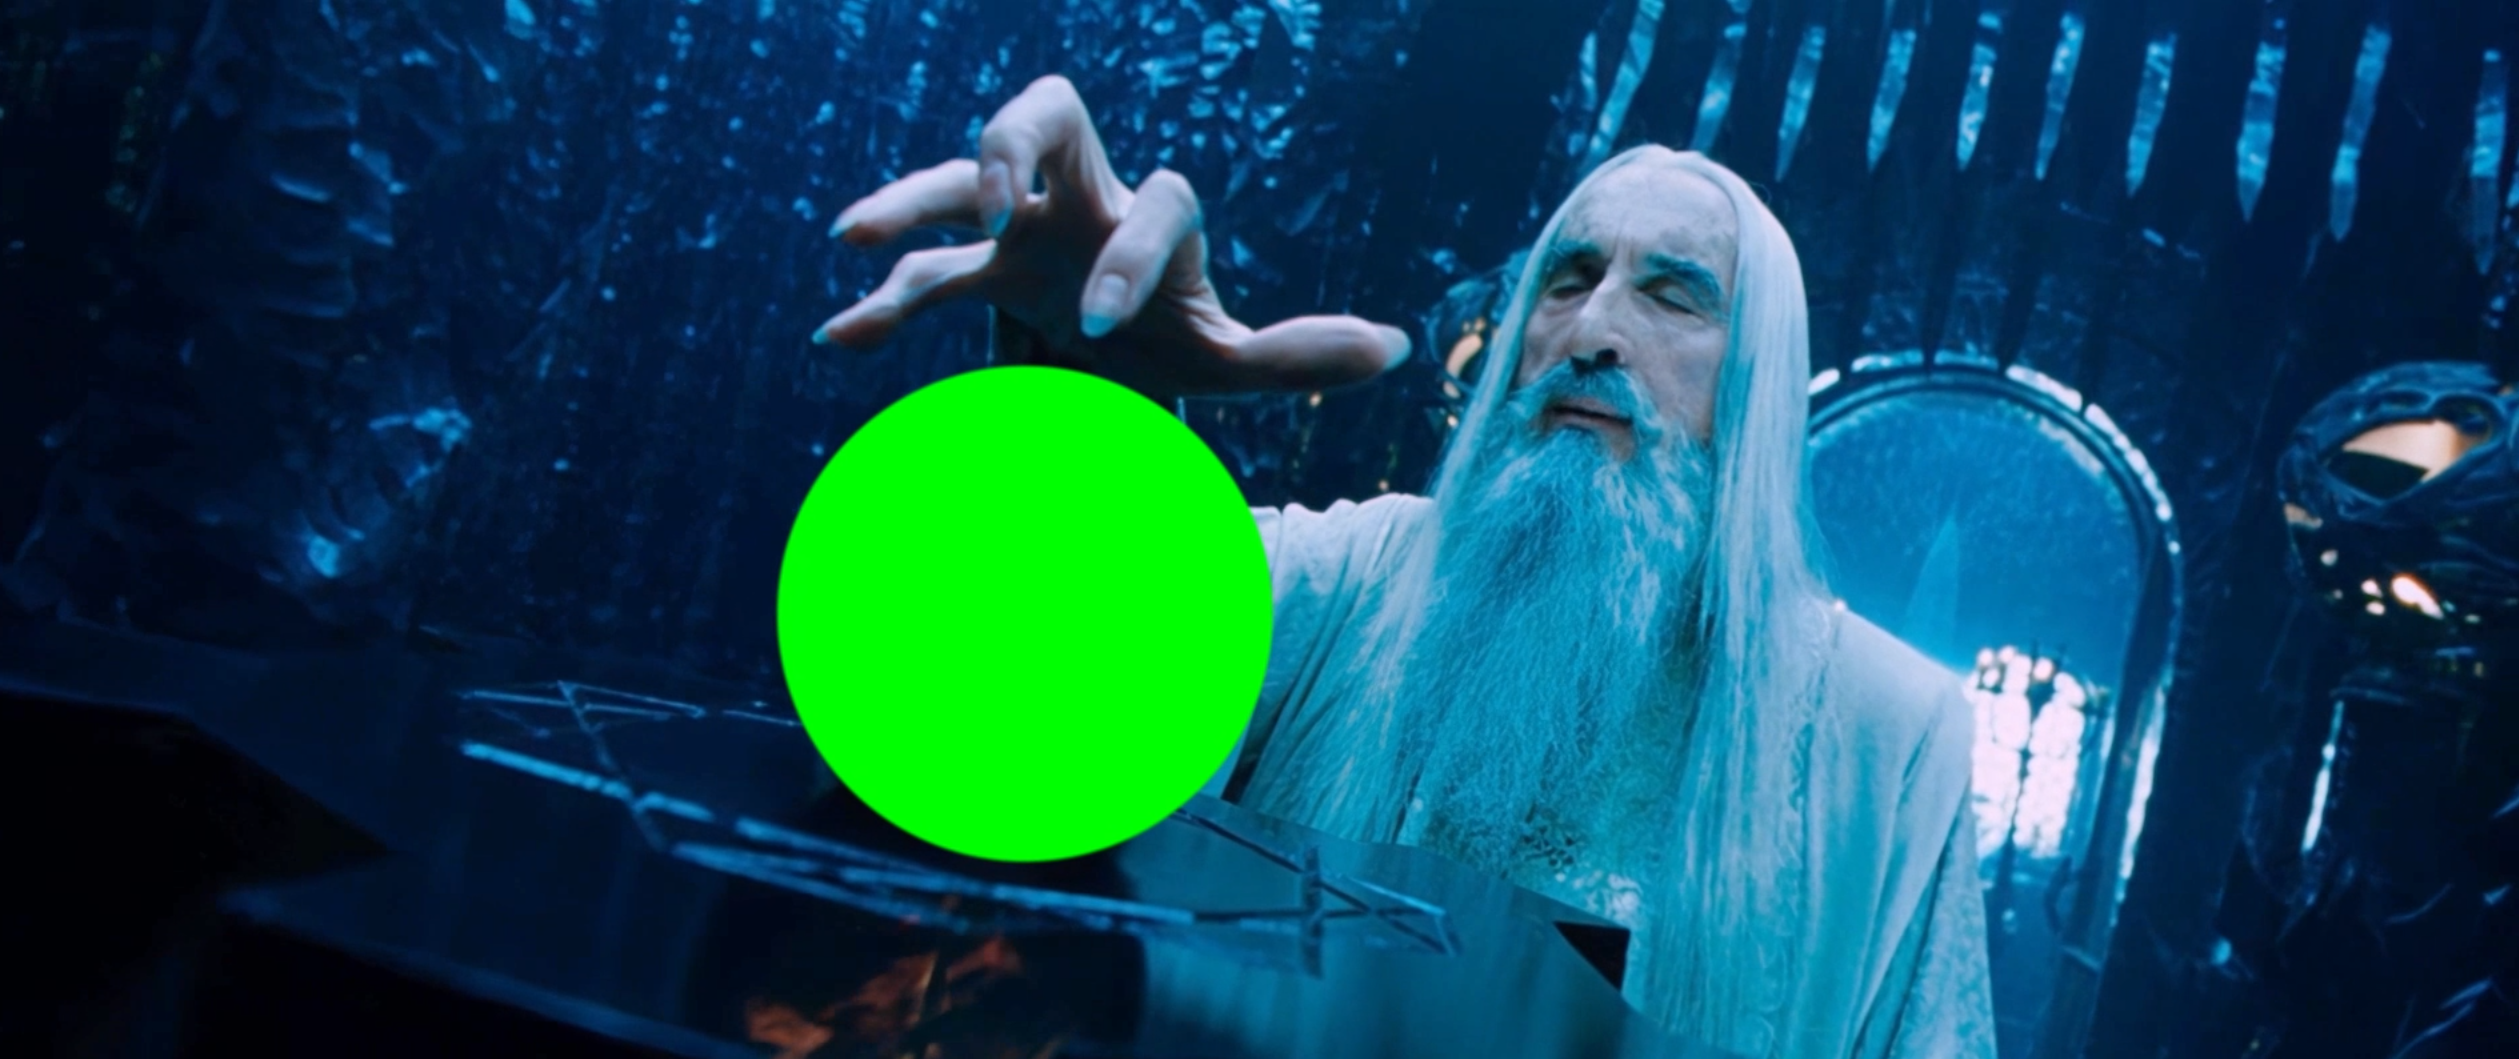 The Lord of the Rings - Sauron Ball scene (Green Screen)